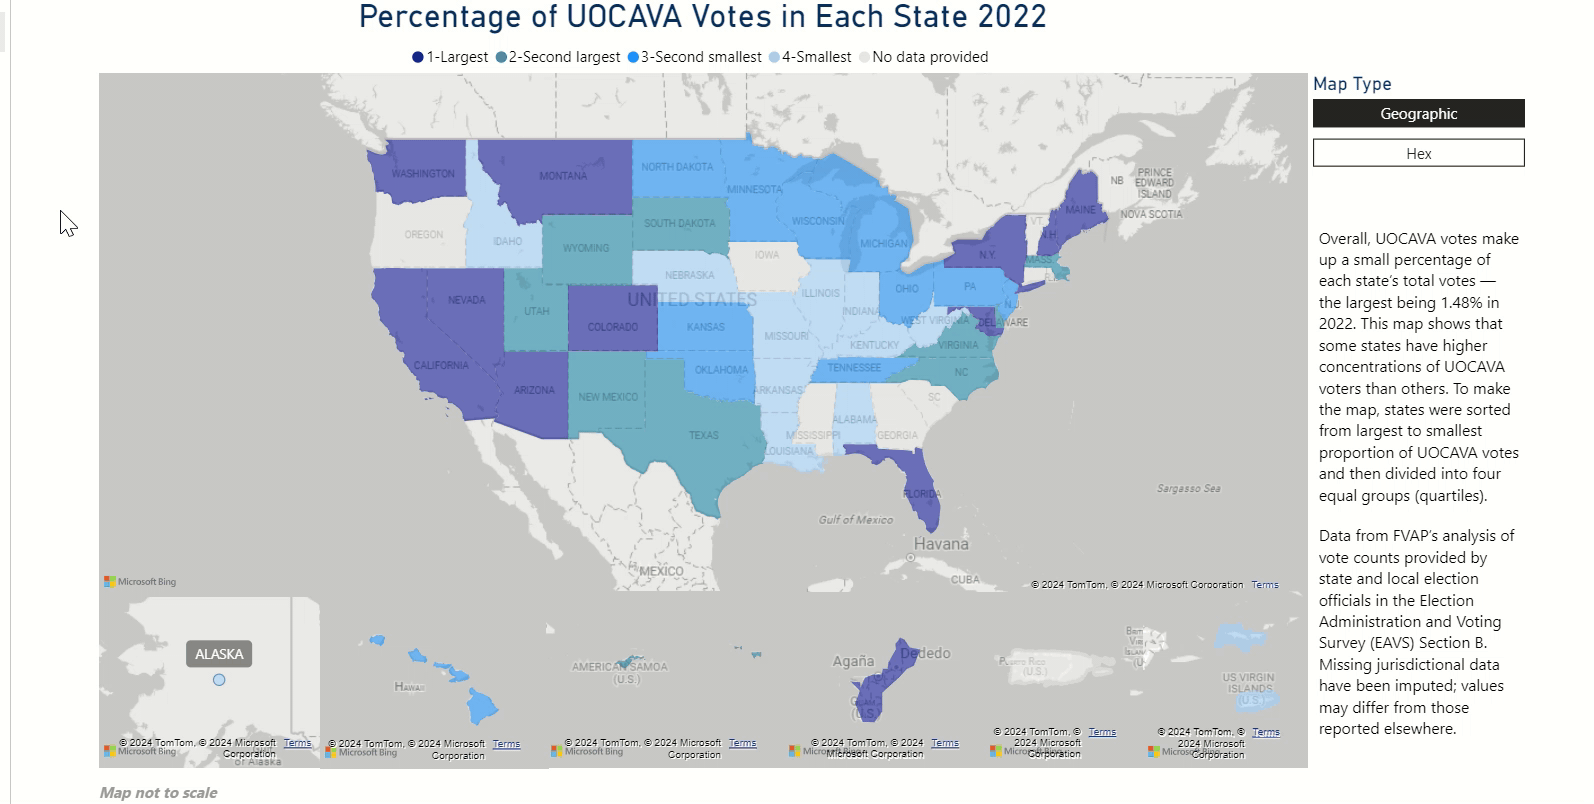 Image Percentage of UOCAVA Voters in Each State